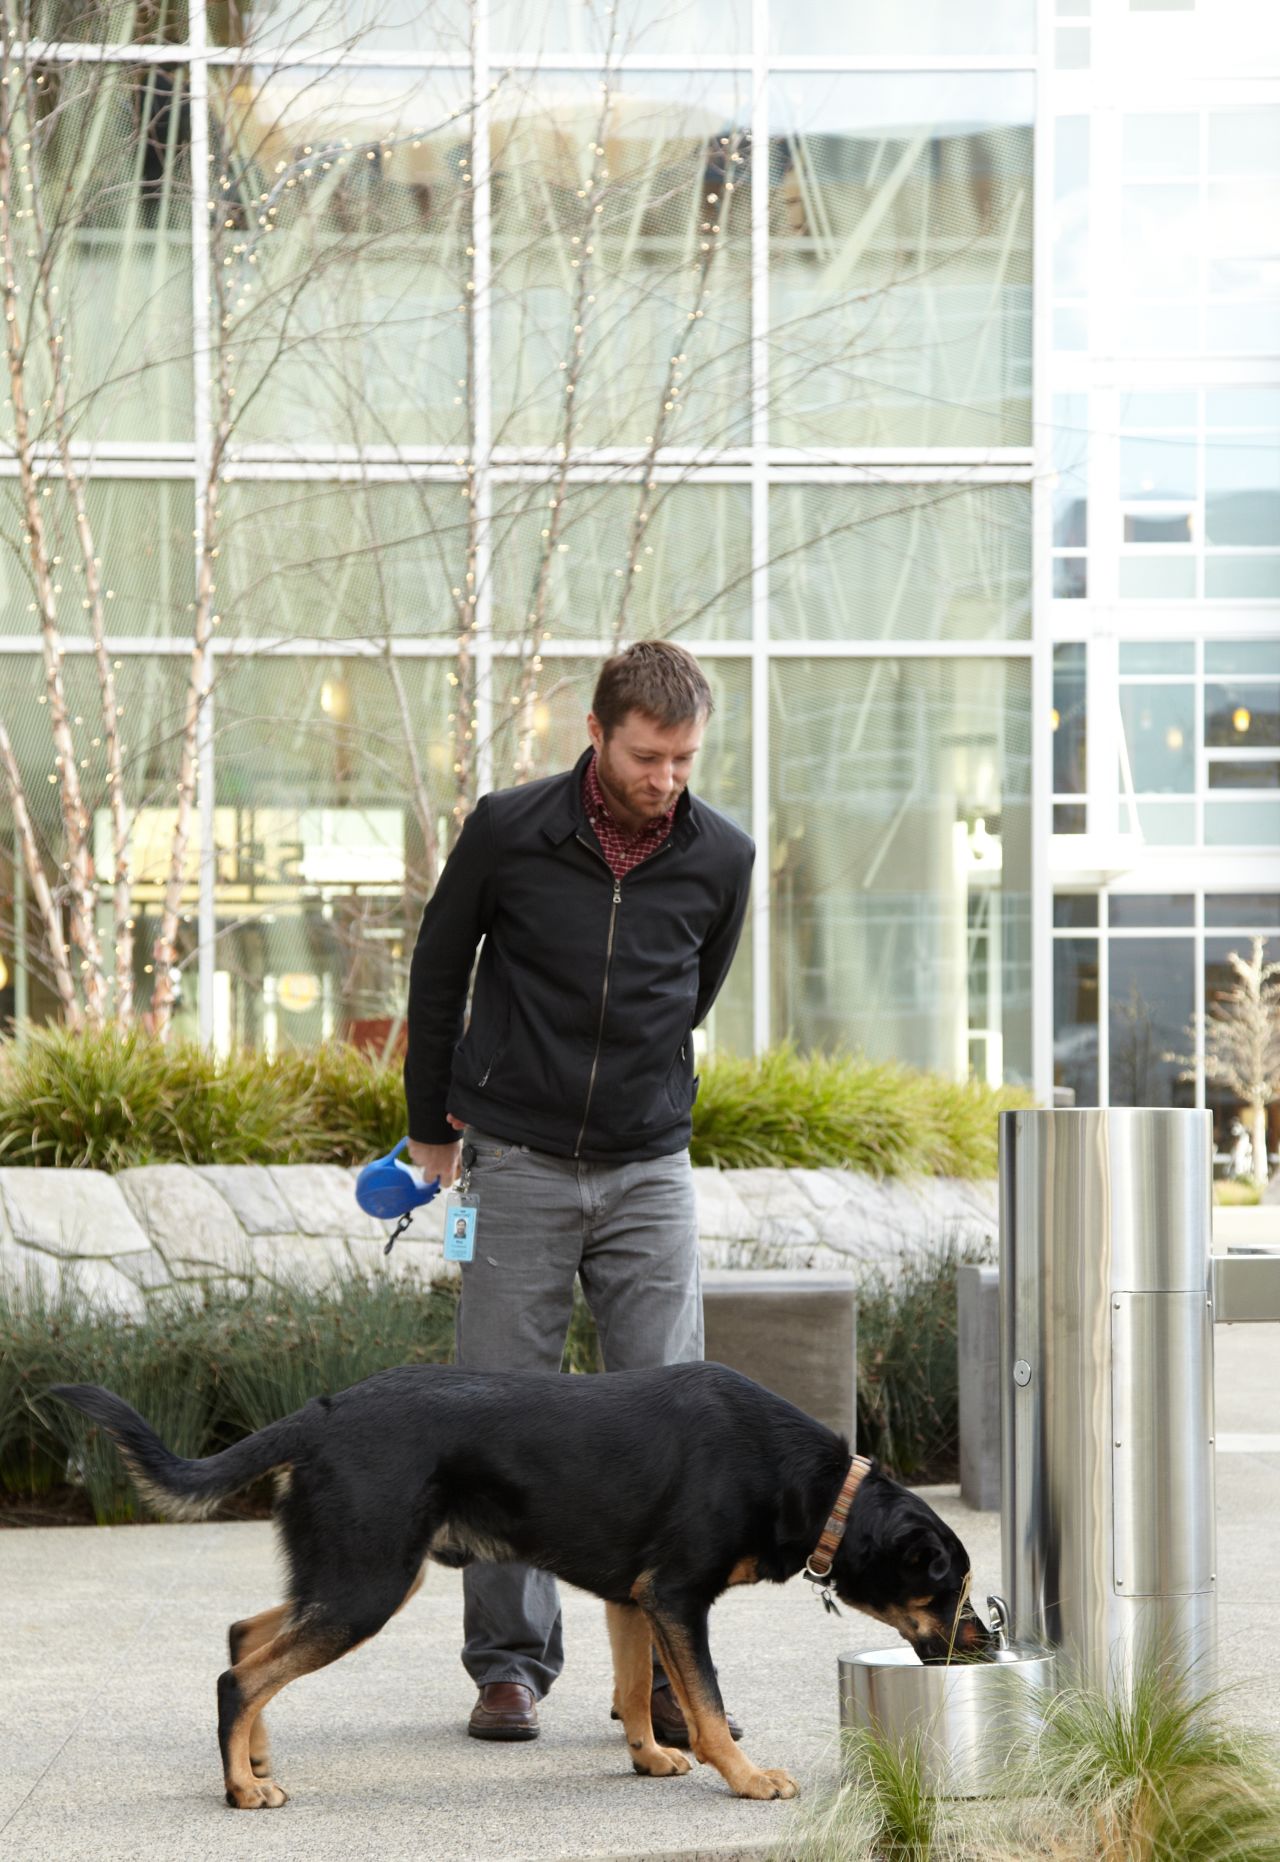 Hundreds of employees at Amazon's Seattle headquarters bring their dogs to work every day. The first dog at Amazon (a corgi named Rufus) has his name stamped on many of the door handles across campus. There are dog biscuits available at reception and here, Roscoe P. Coltrane enjoys one of the dog-friendly drinking fountains.